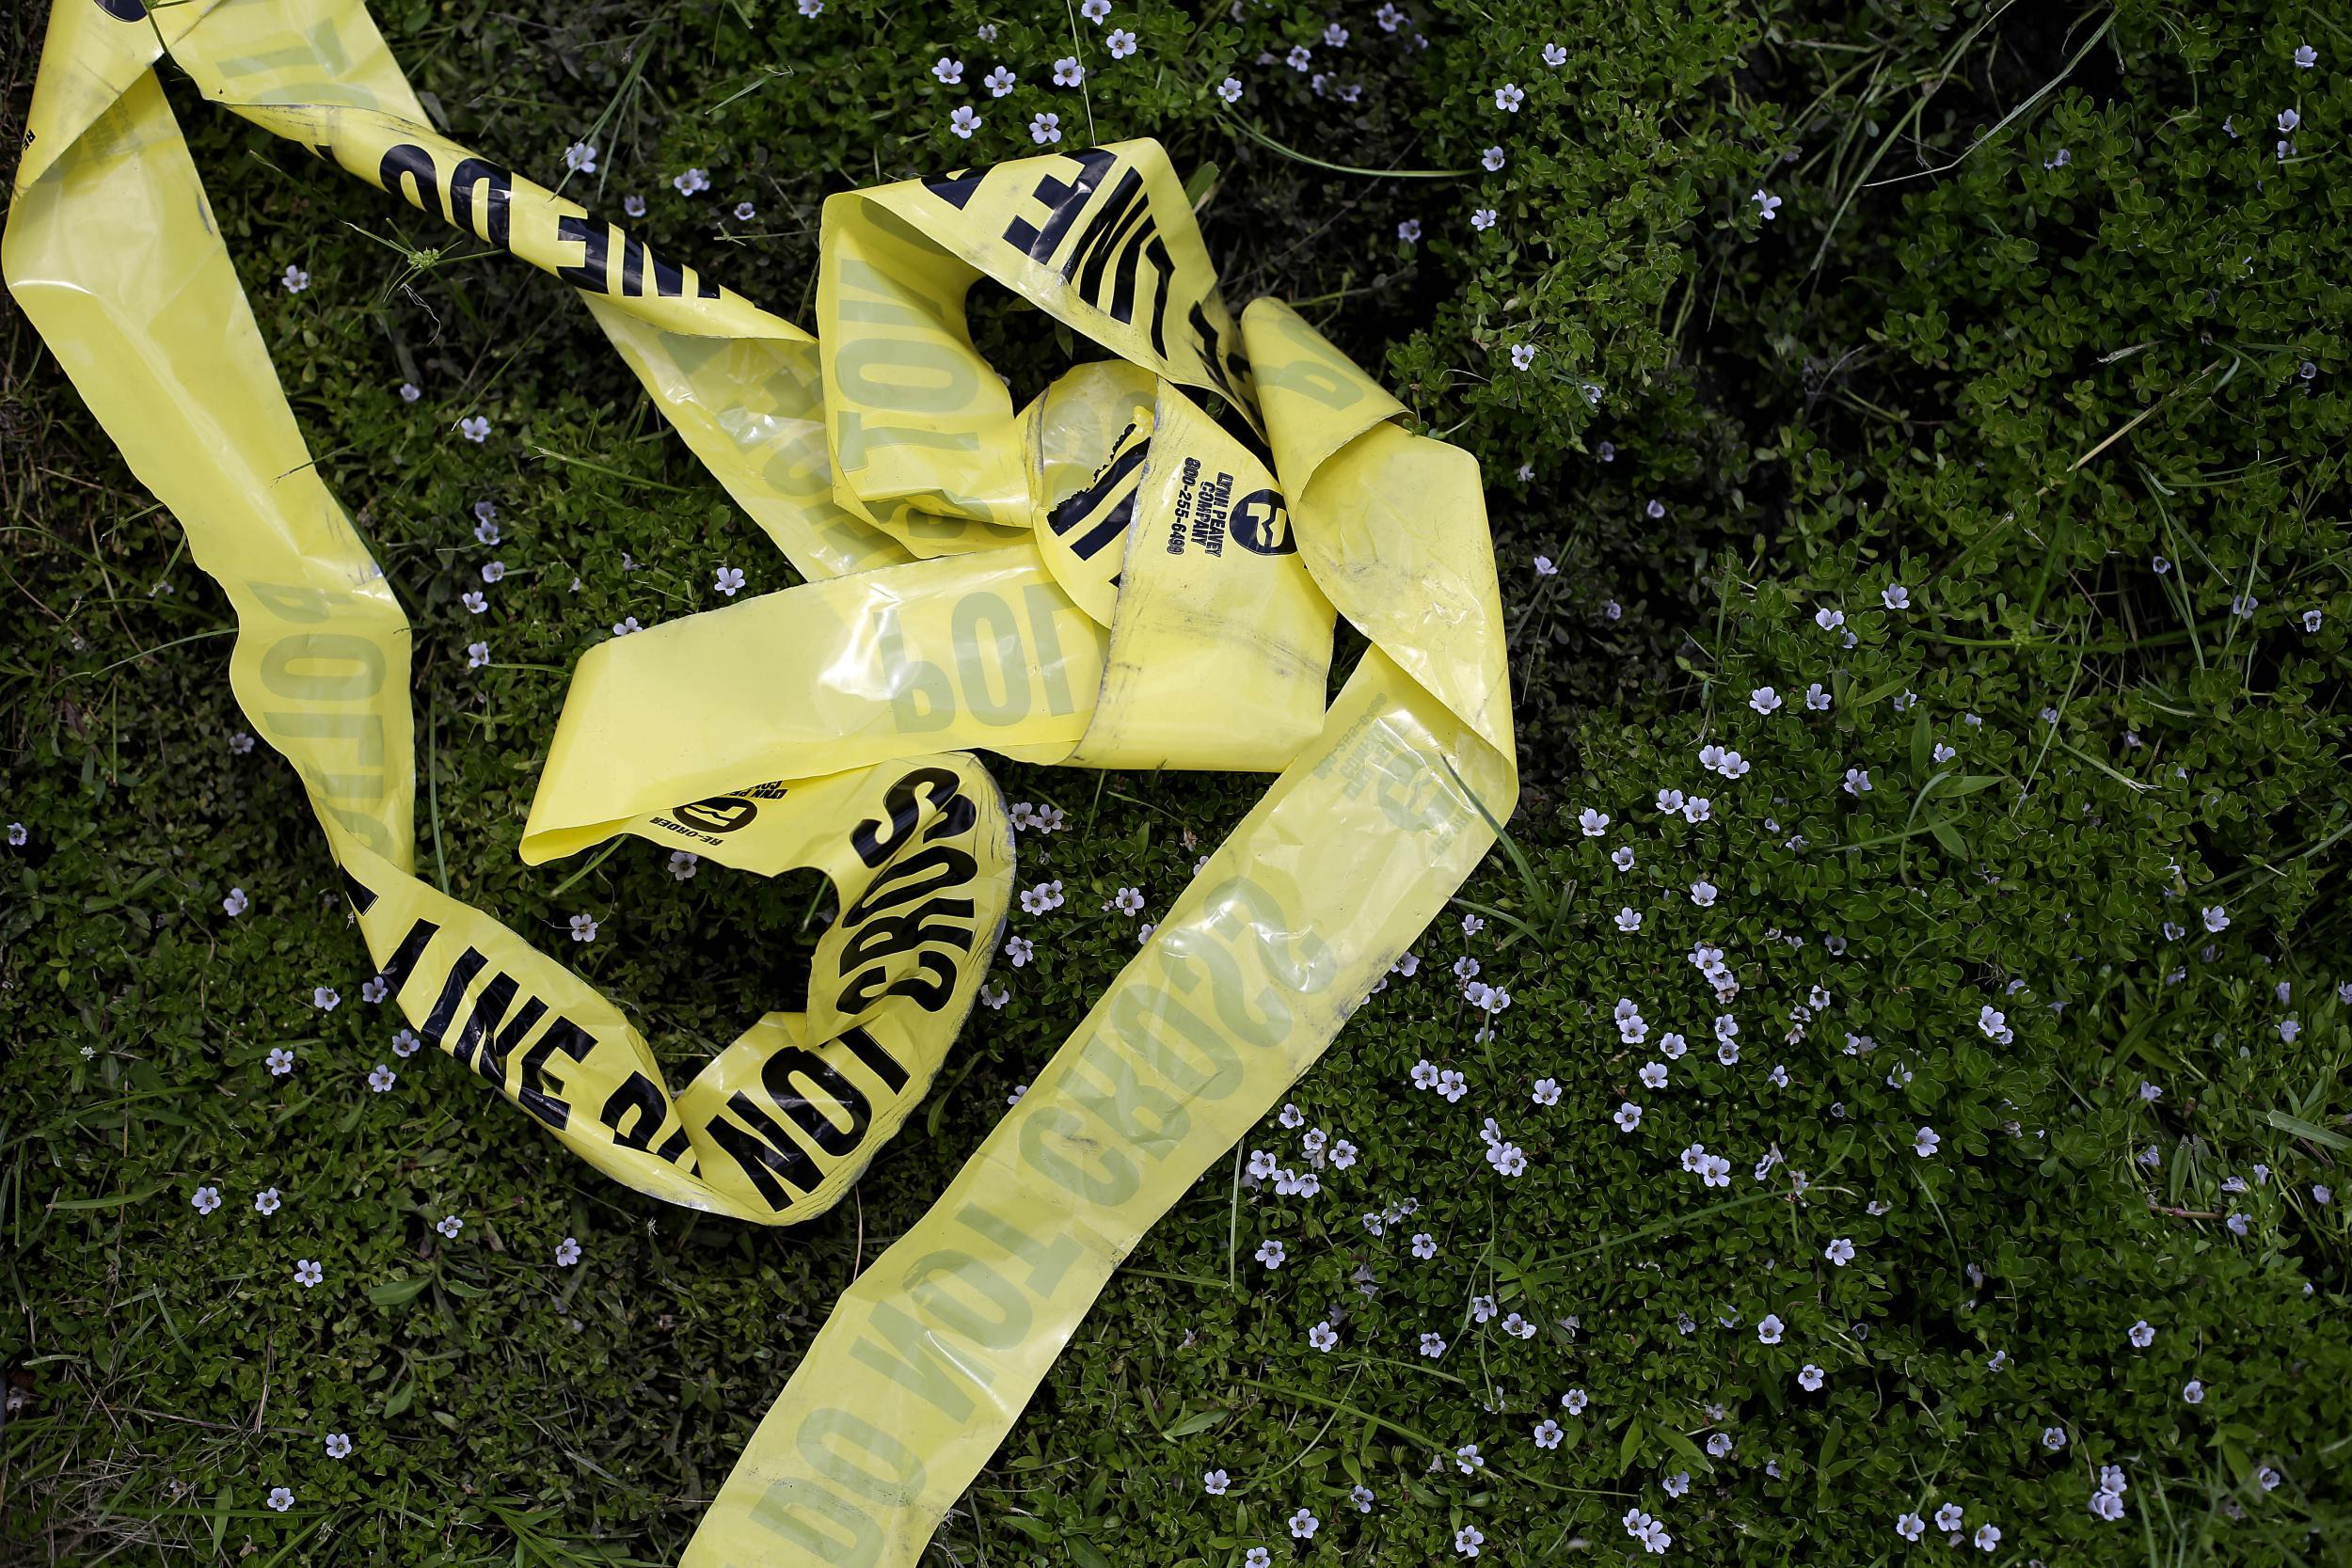 Yellow police crime scene tape rests in the grass in Baton Rouge, Louisiana after an unrelated crime